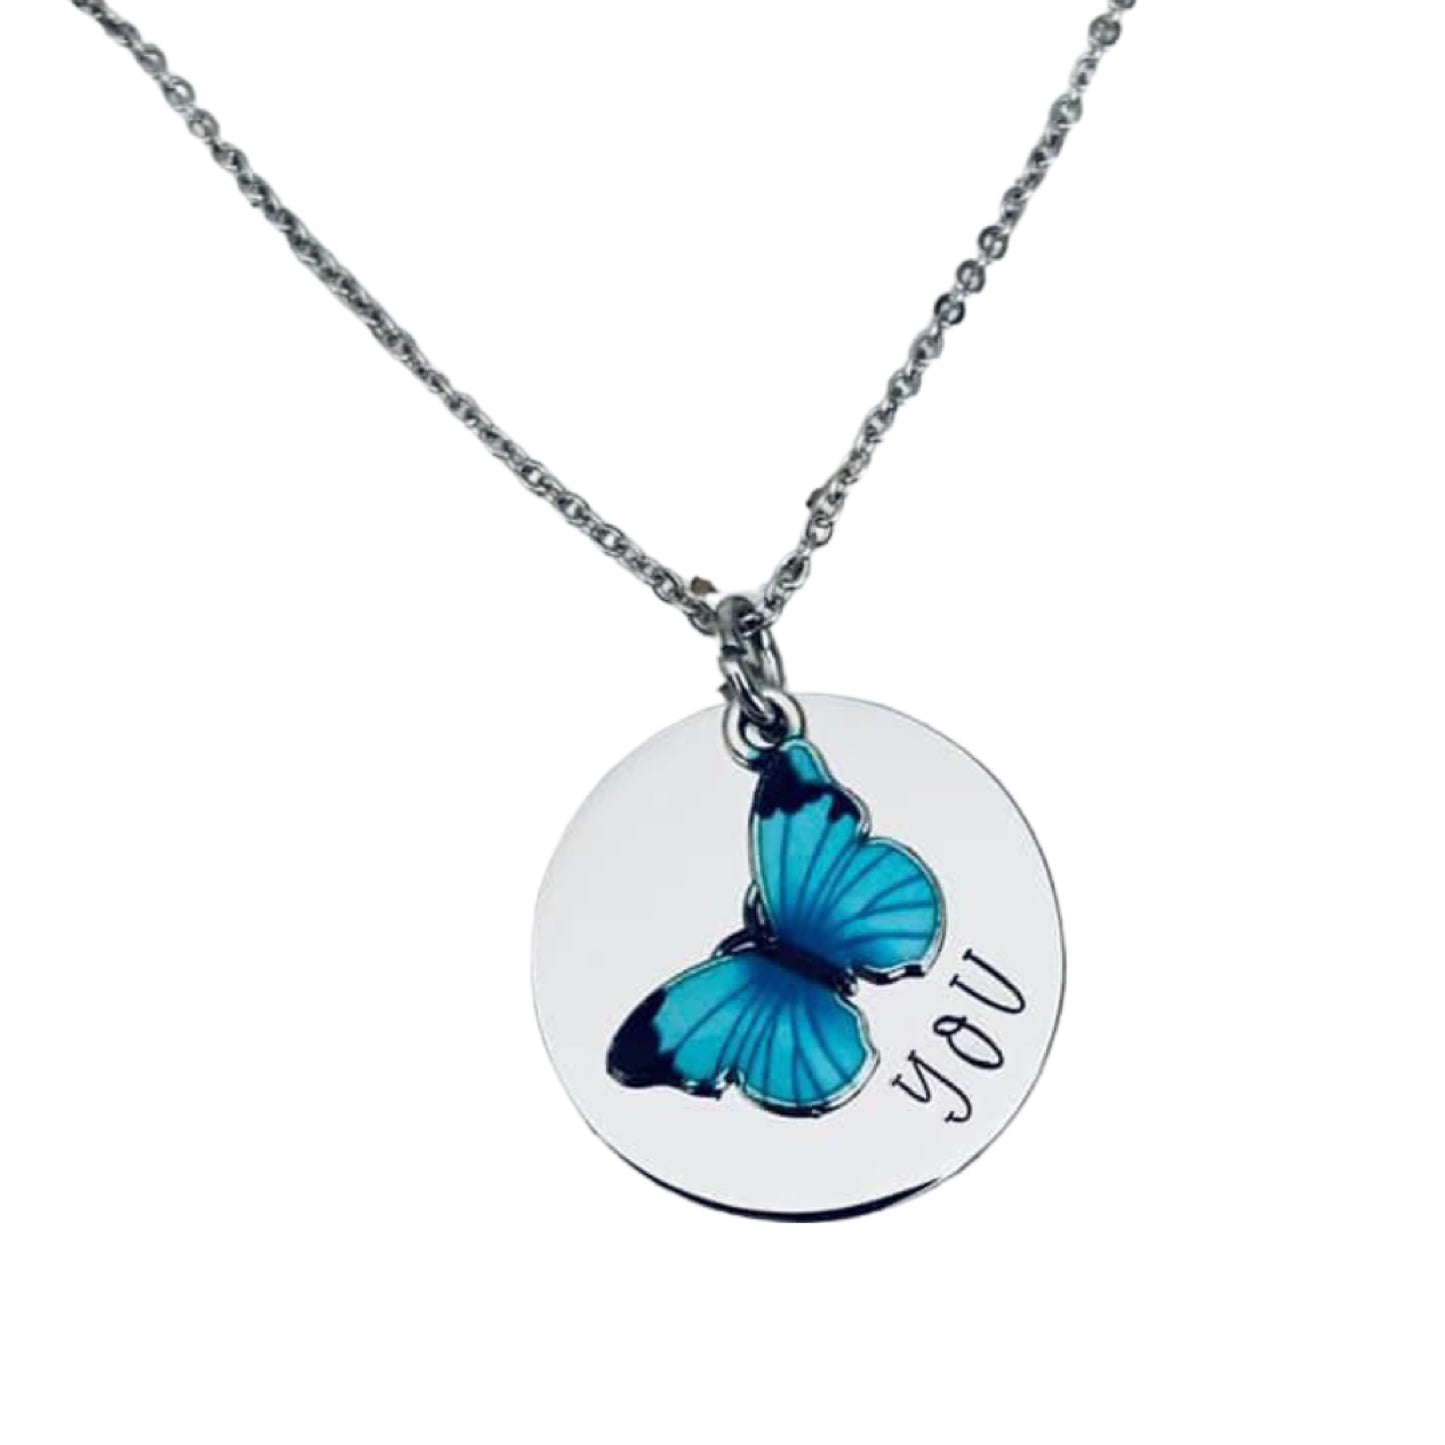 Butterfly You necklace